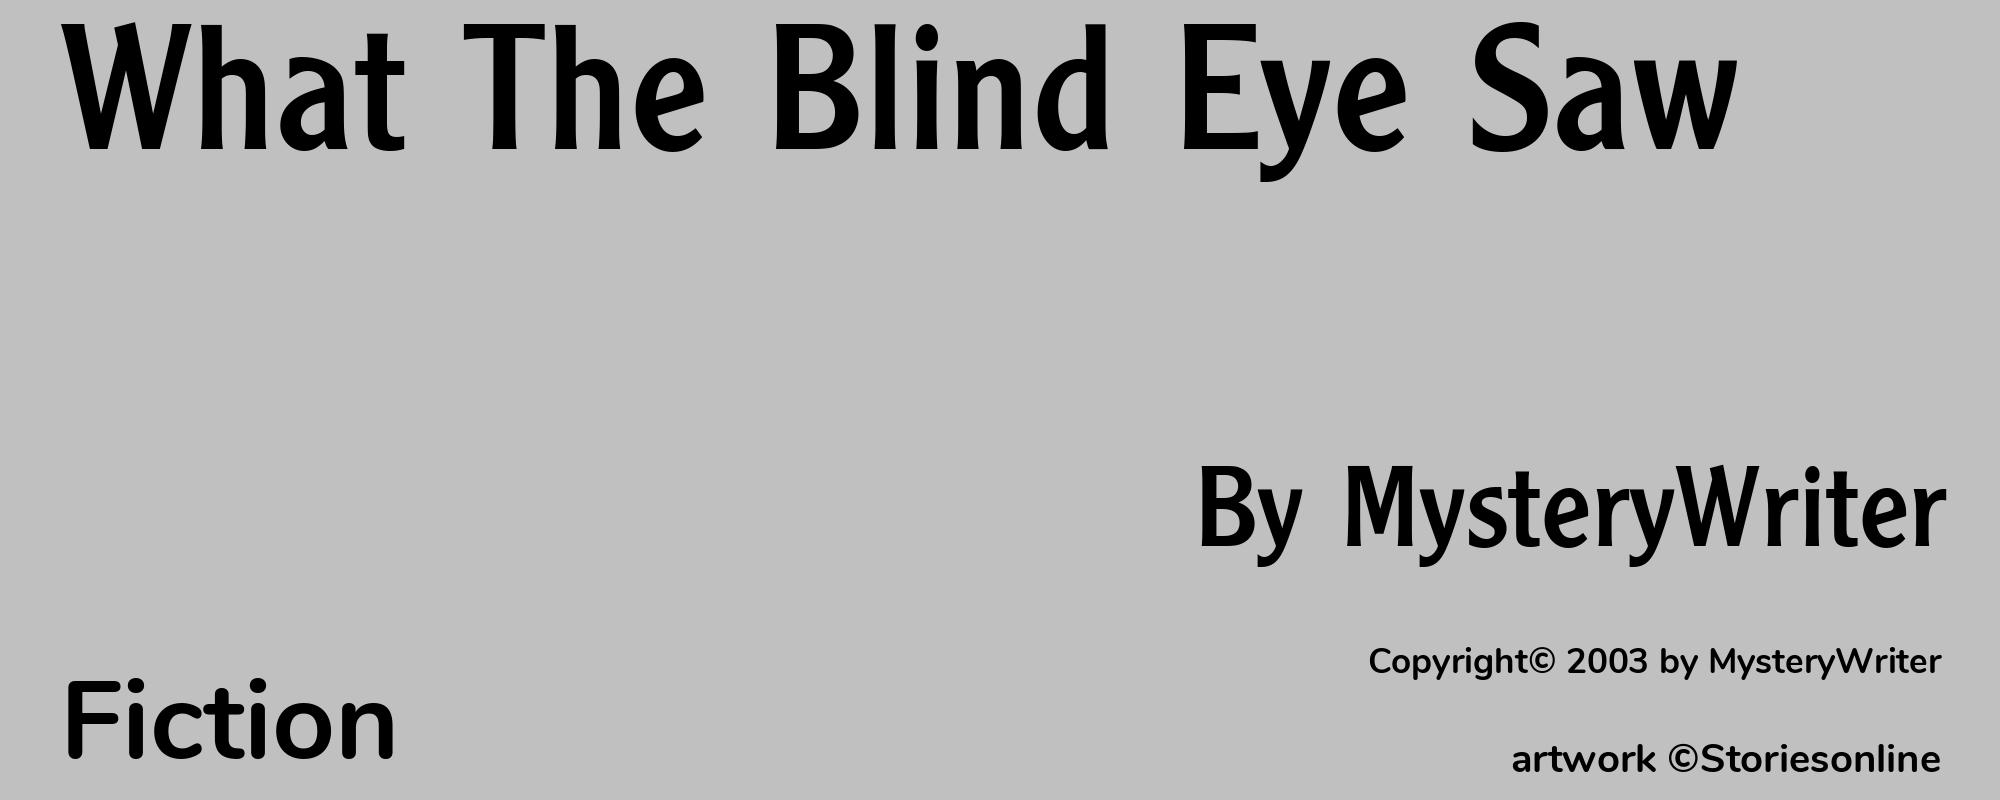 What The Blind Eye Saw - Cover